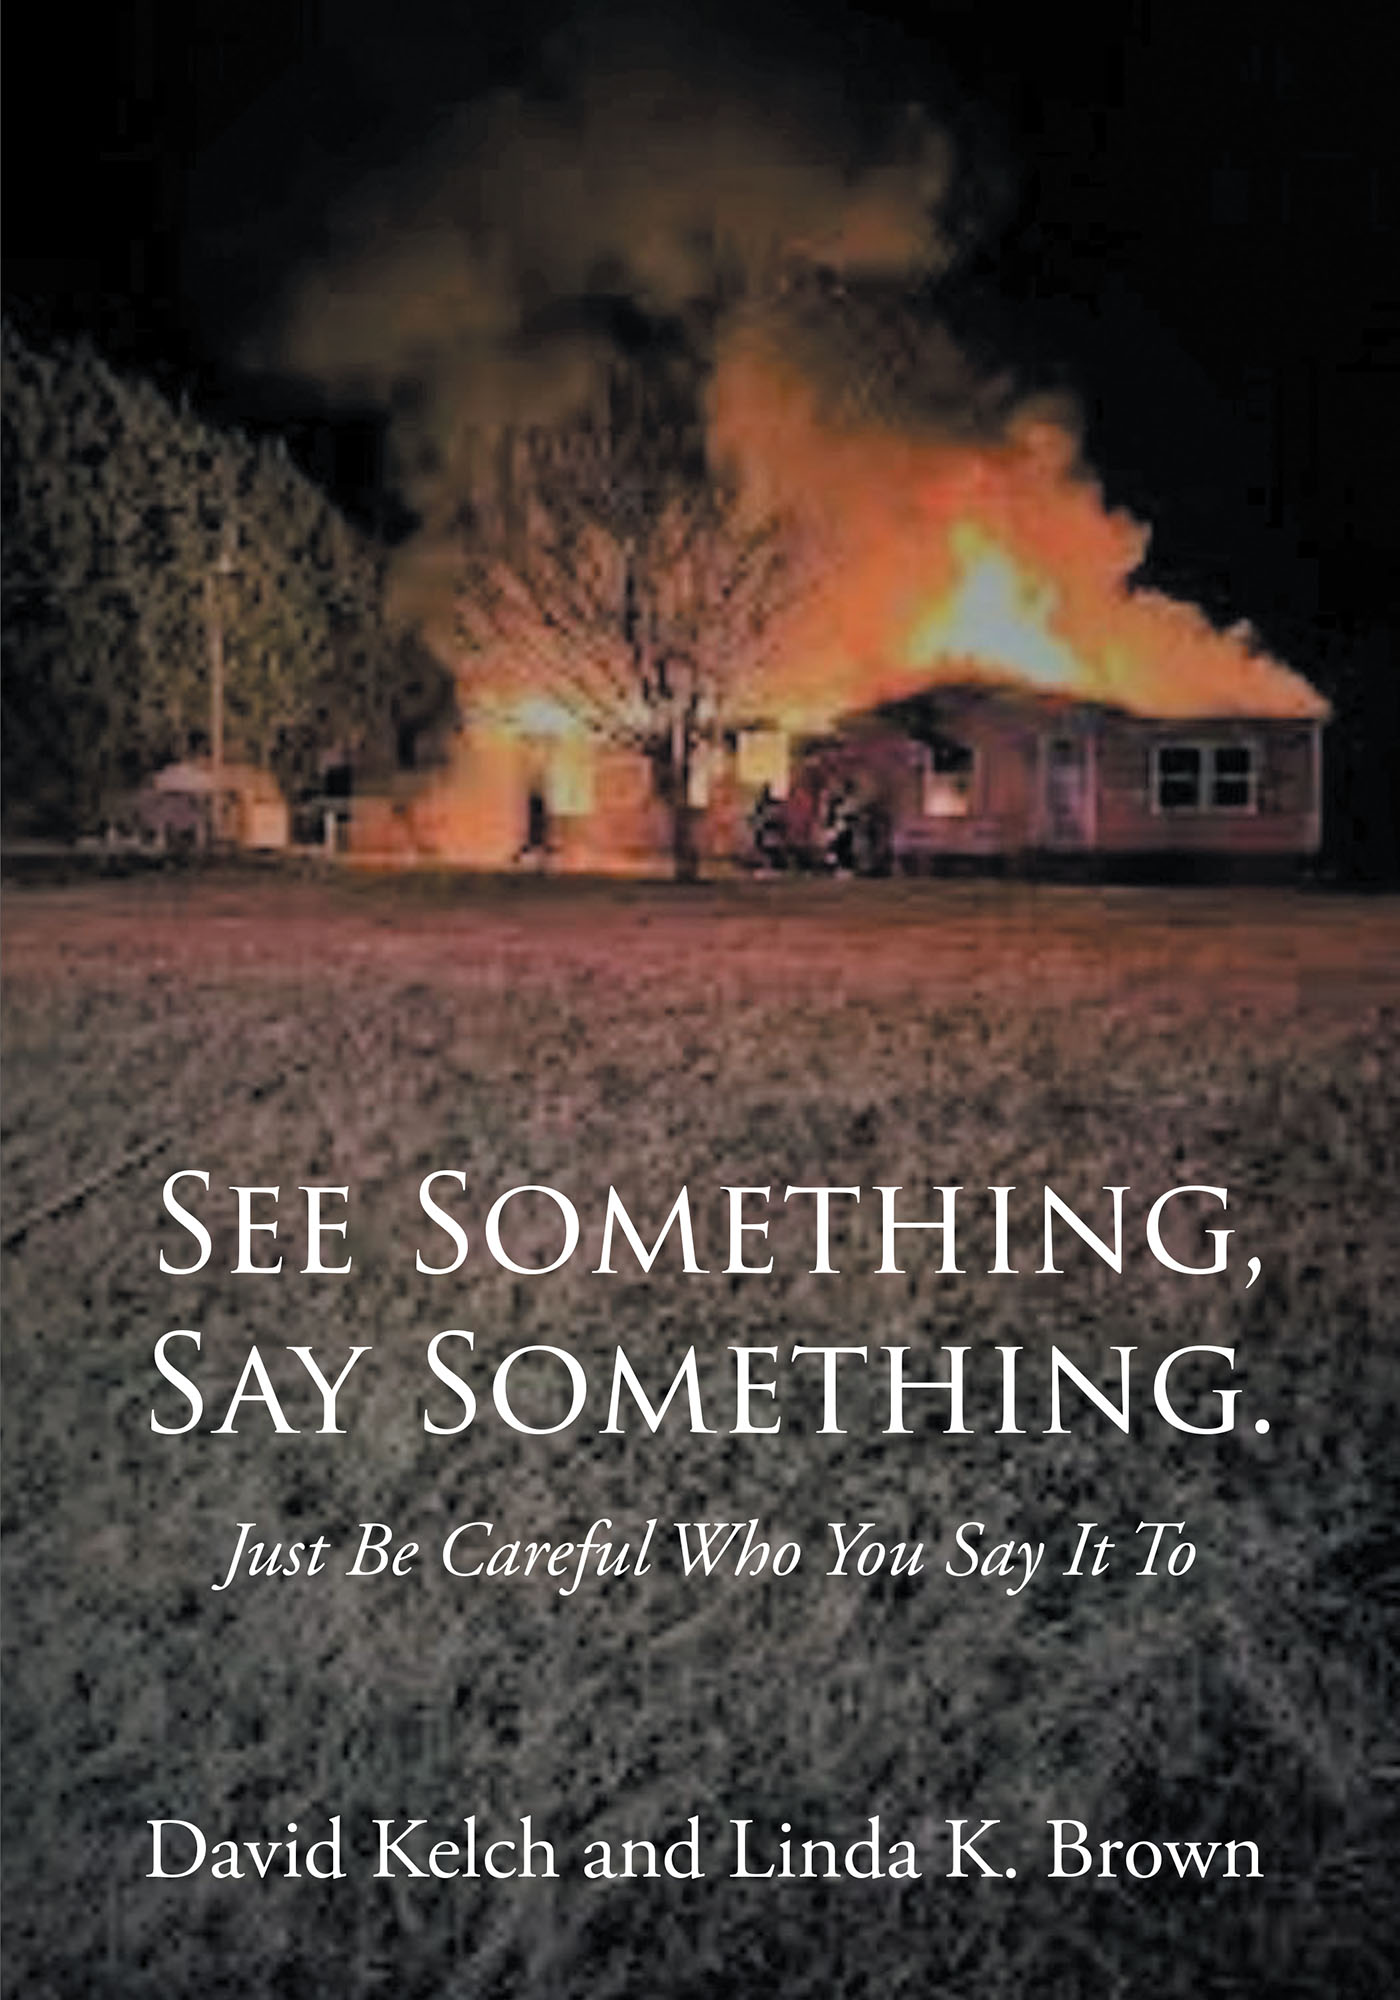 Author David Kelch and Linda K. Brown’s New Book, “See Something, Say Something.” Is the True Story One Family Harassment by Police After Revealing Their Corruption